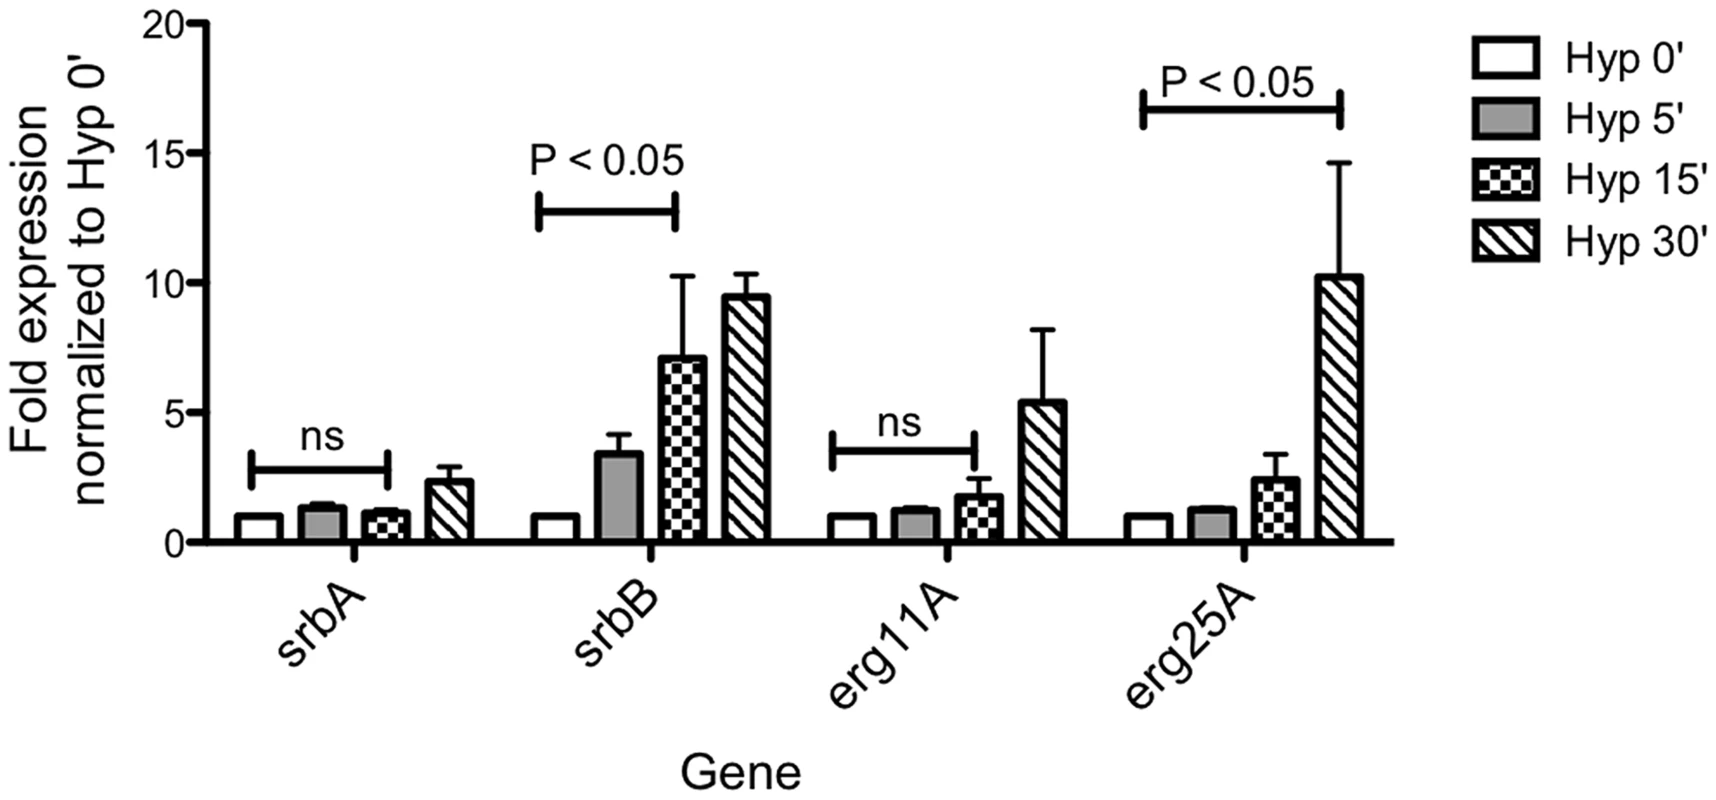 Temporal transcriptional induction of SrbA and SrbB in response to Hypoxia Reveals SrbB transcript levels are induced prior to SrbA.